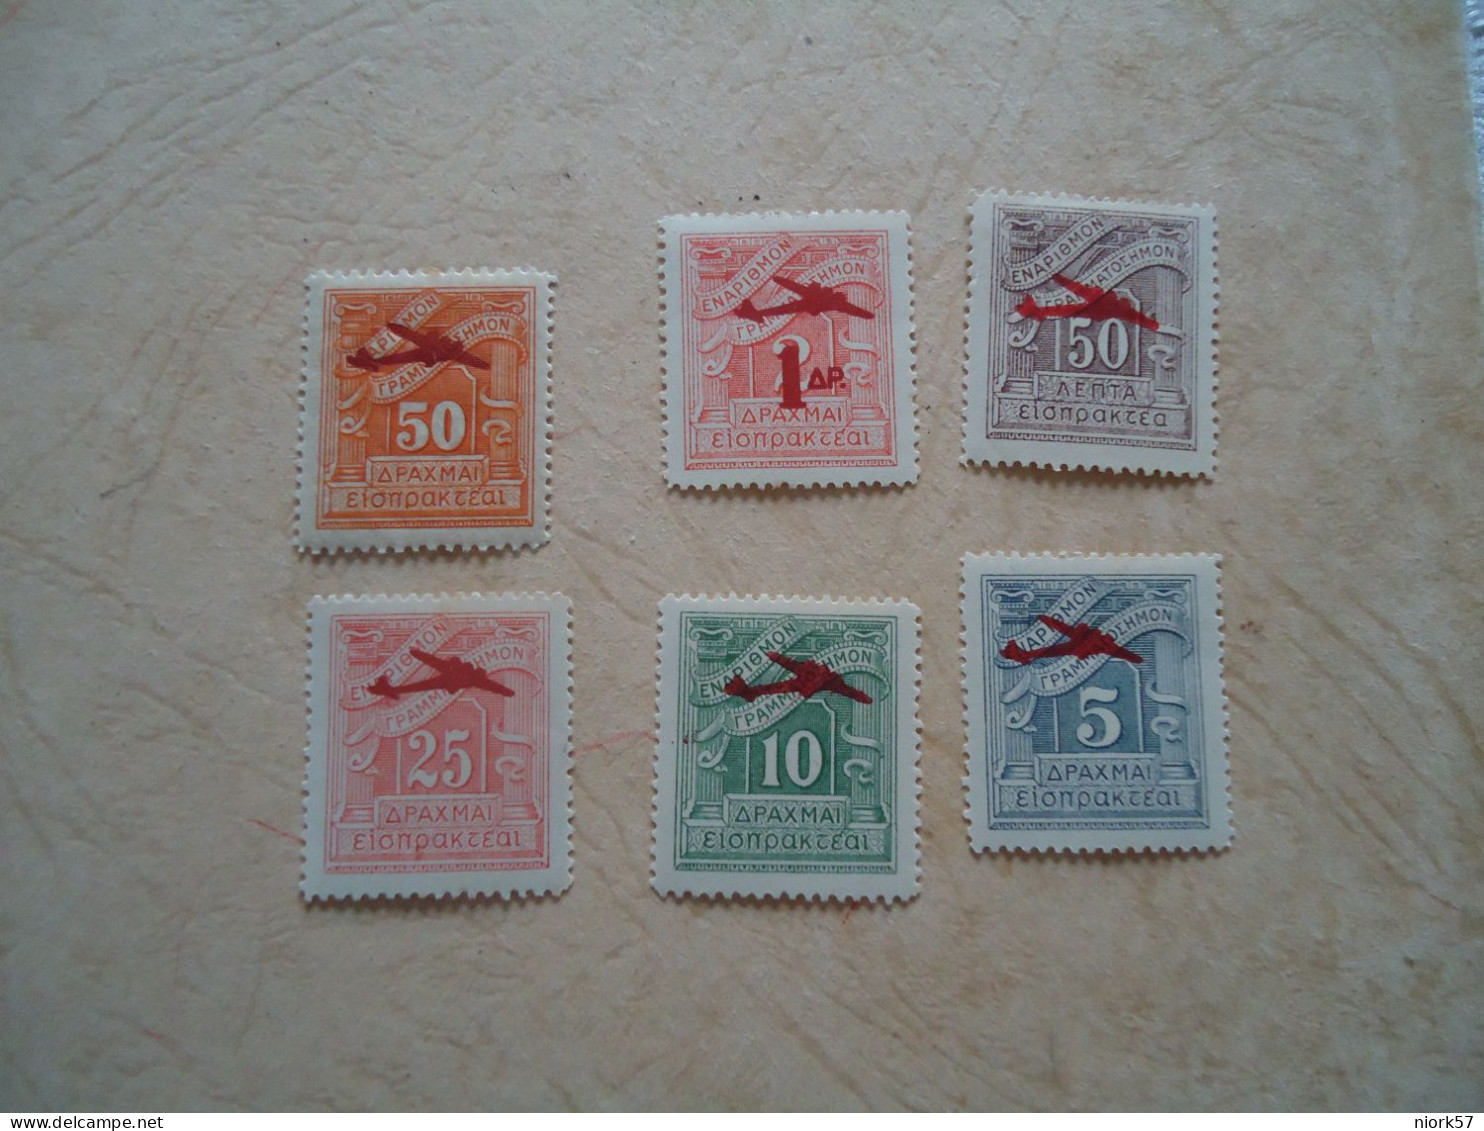 GREECE     ΜΝΗ   6  STAMPS POSTAGE DUE  OVERPRINT  AIRPLANES - Used Stamps